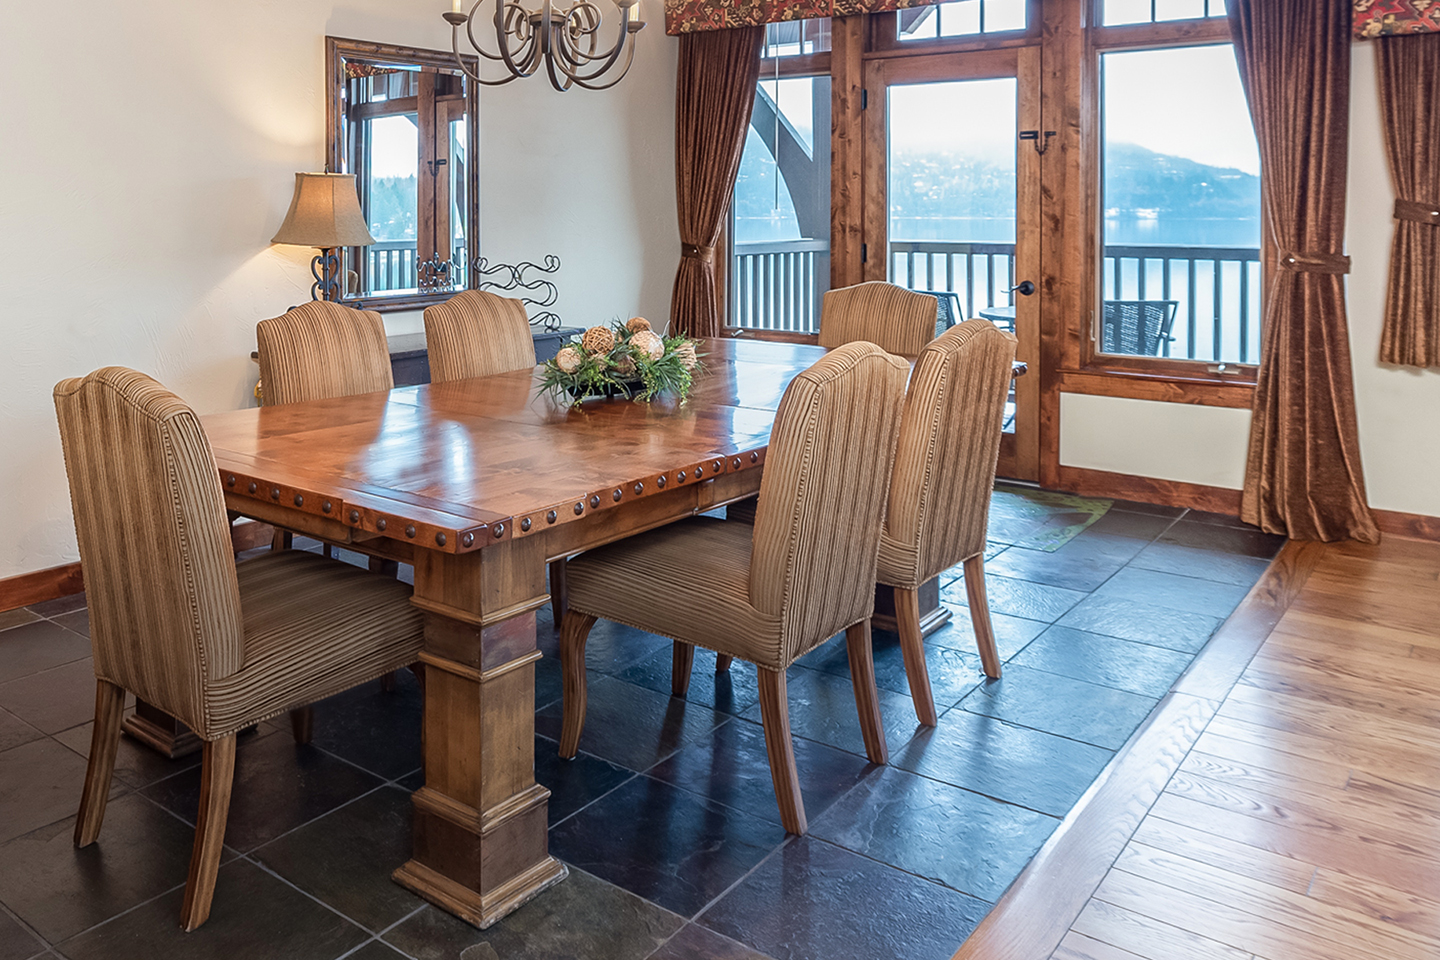 Gather together around the table in this spacious suite. – Michael Klippert